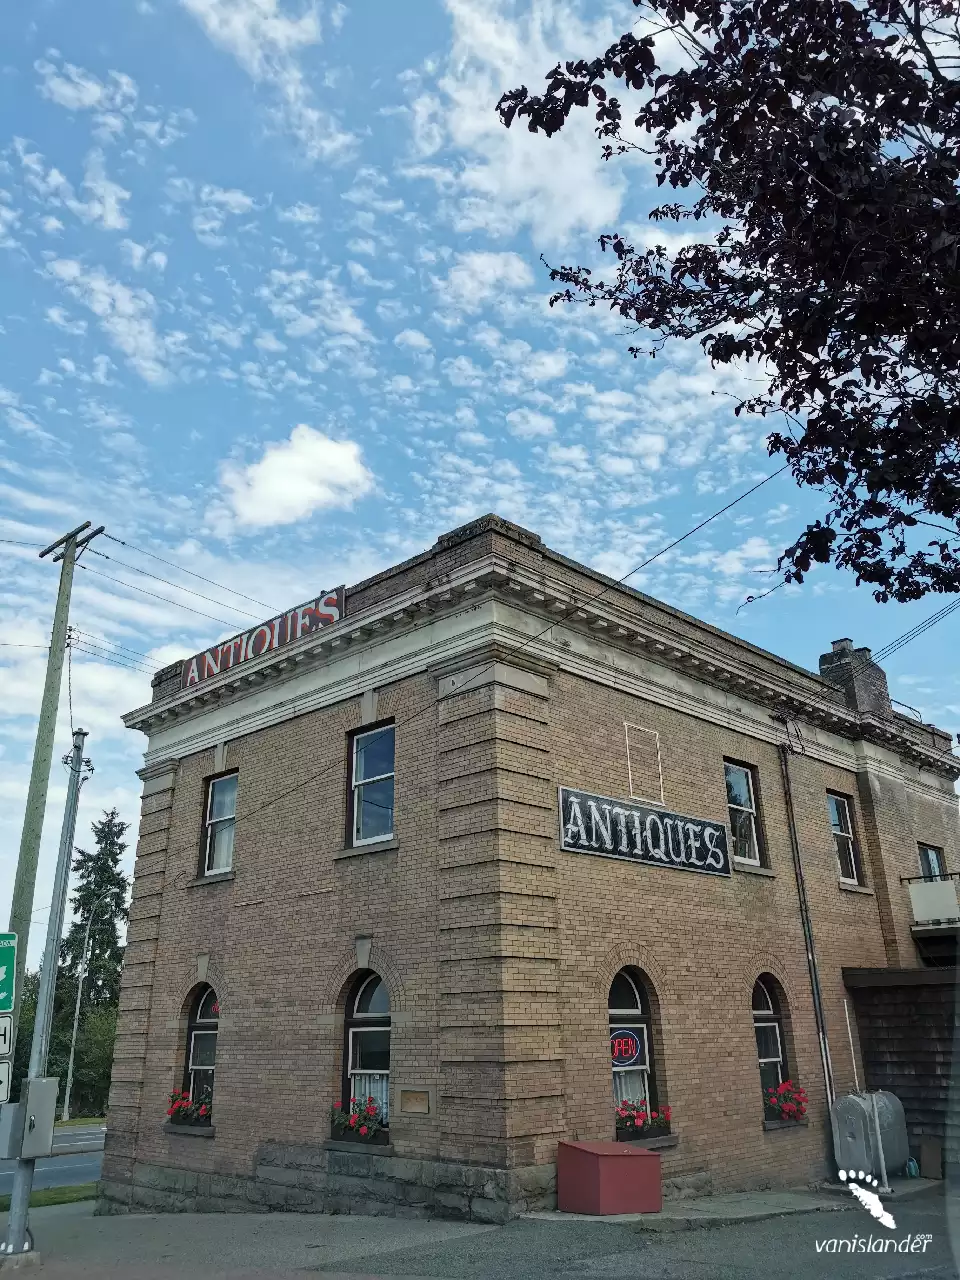 ANTIQUES Building view in Ladysmith, Vancouver Island